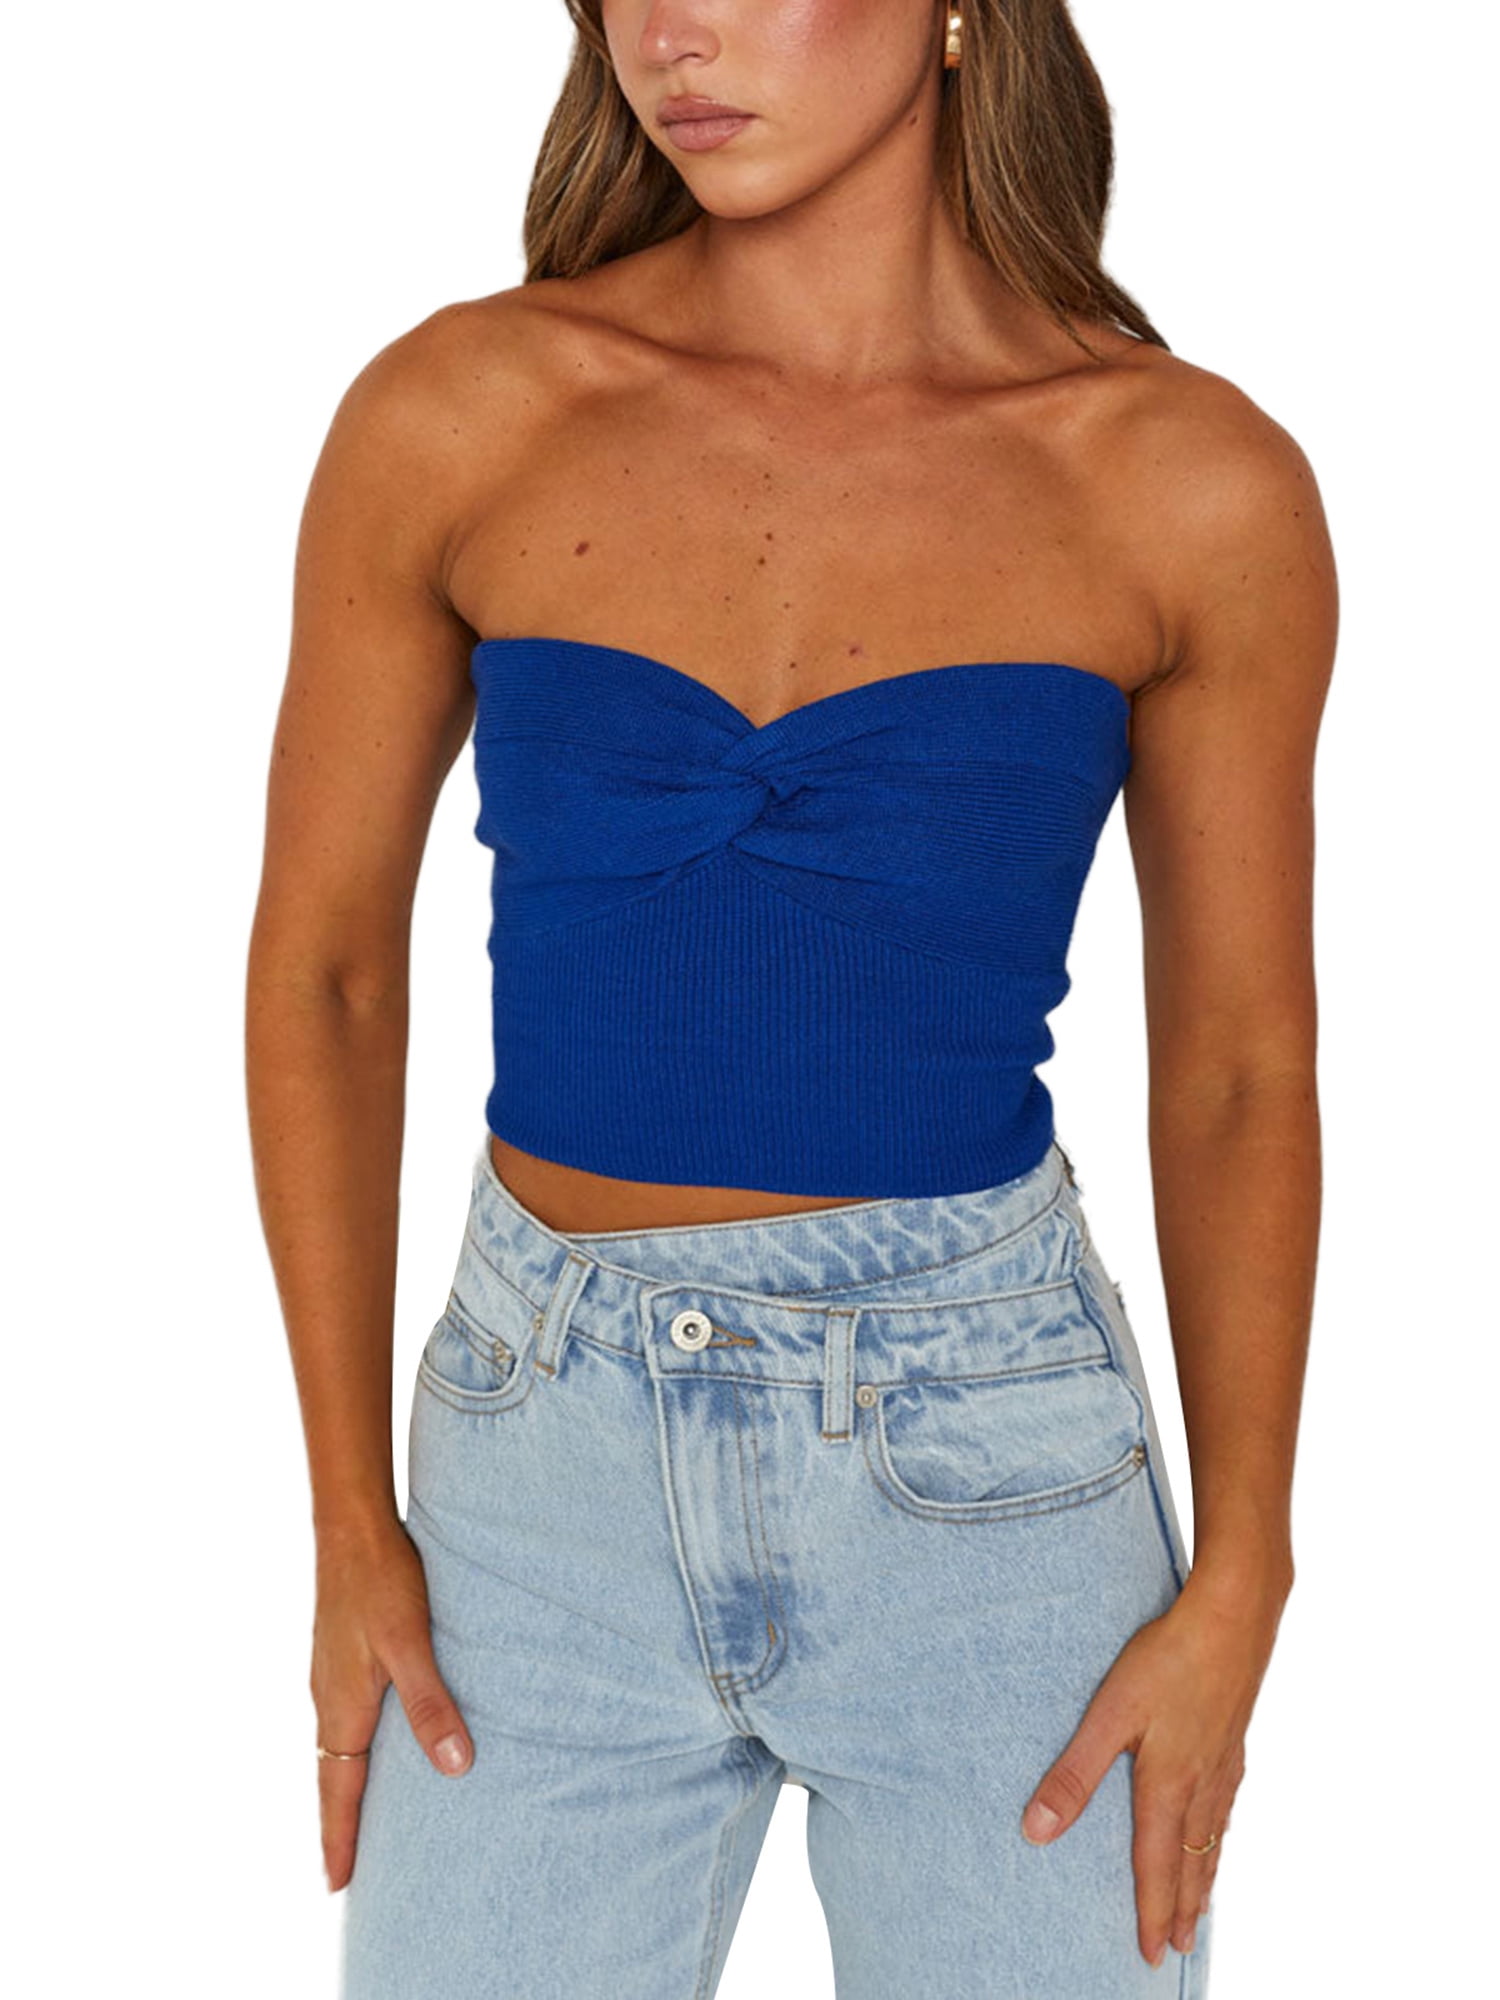 Blue Snatched Rib Tube Top